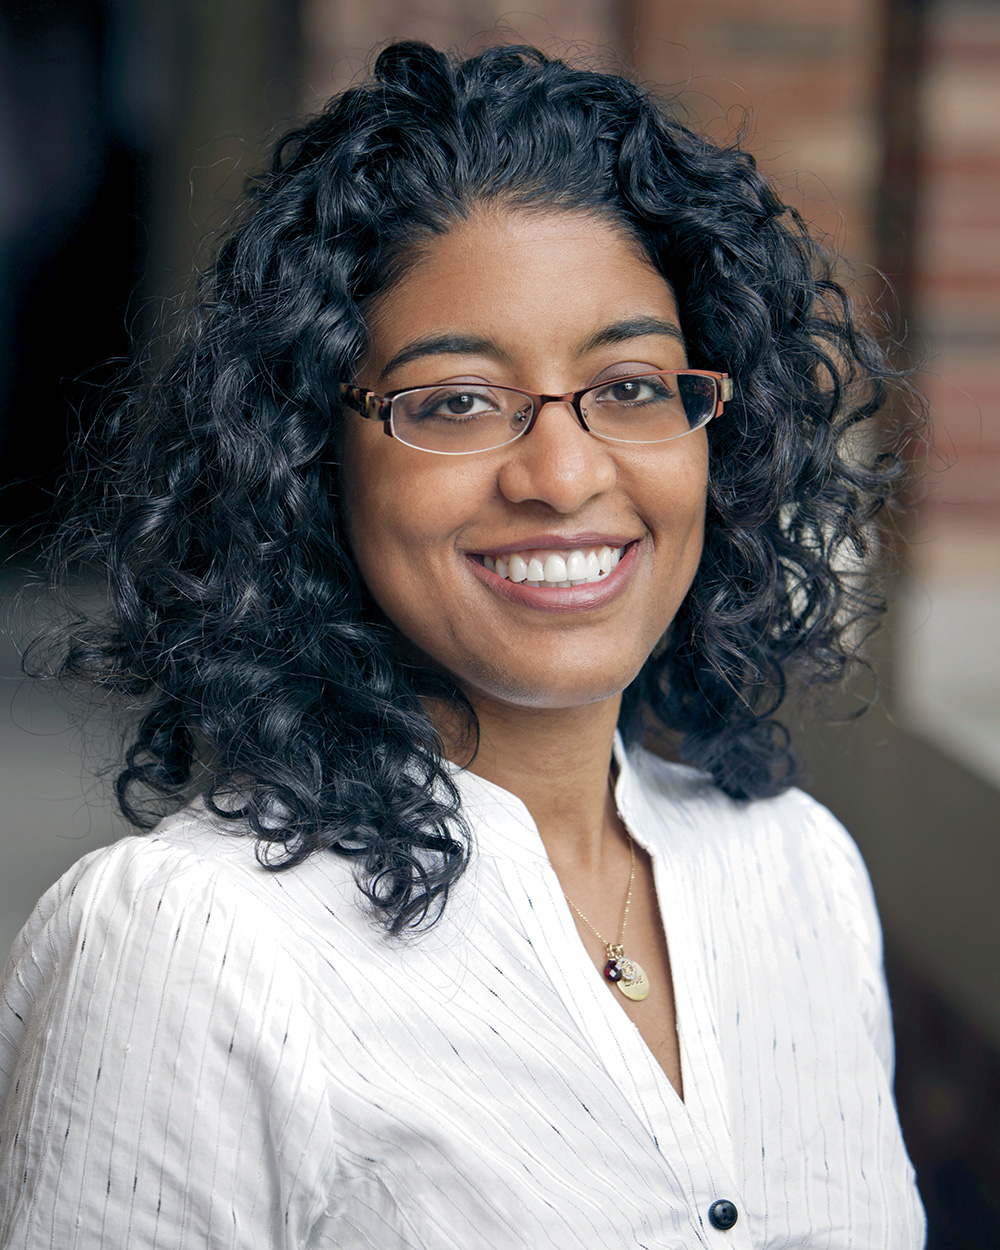 A headshot of Tracey L. Meares wearing wire glasses, a gold necklace, and a white and silver shirt. Meares has brown skin, brown eyes, and long curly black hair. She faces the viewer and smiles. 